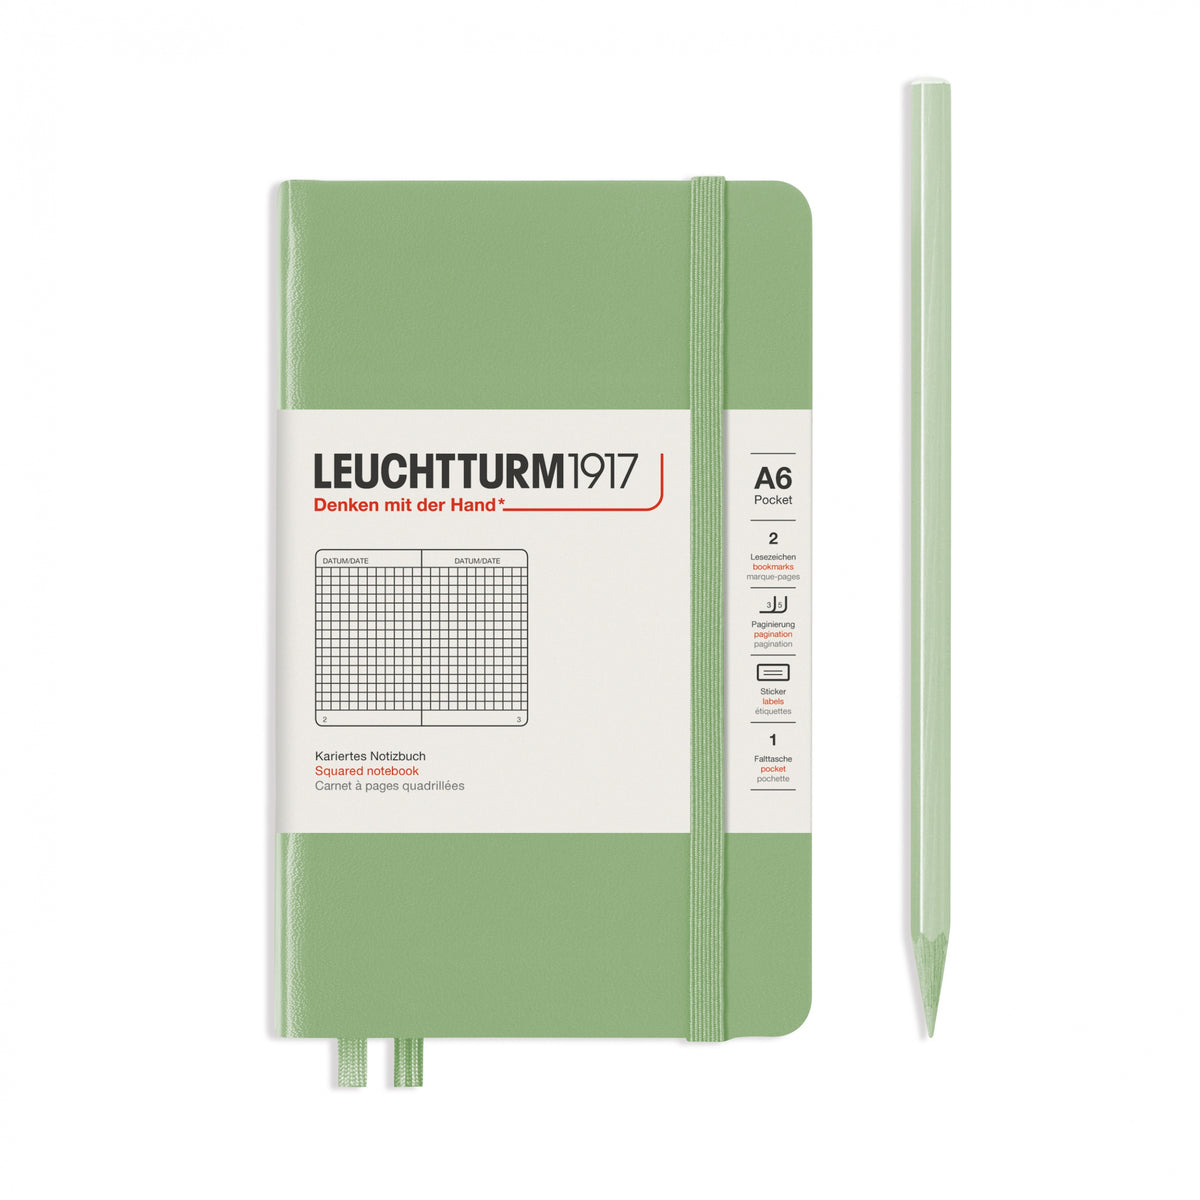 Leuchtturm1917 Notebook A6 Pocket Hardcover in sage green and squared ruling from penny black